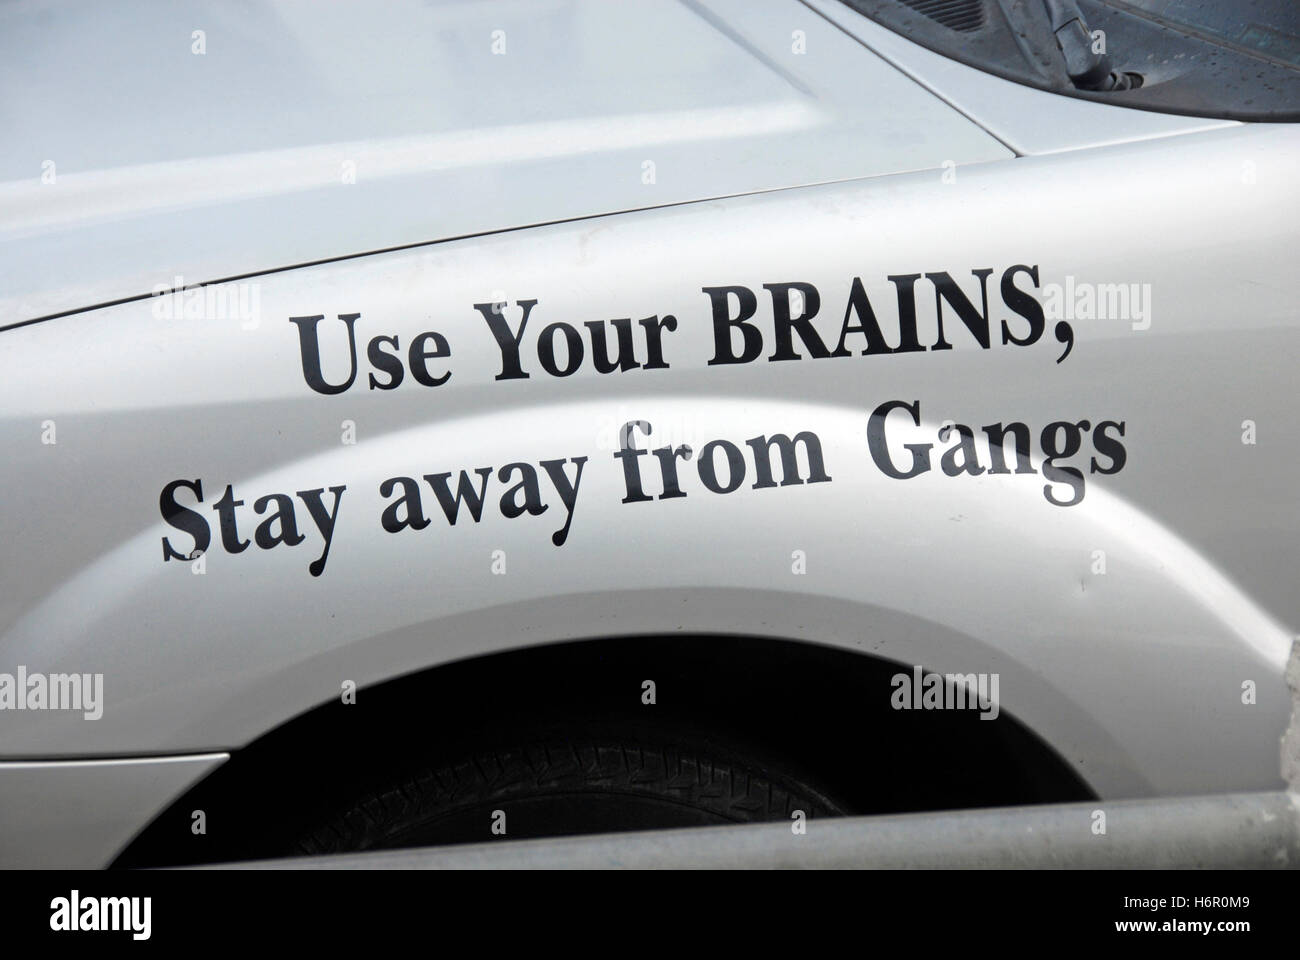 'Avoid Gangs' message on side of car Stock Photo